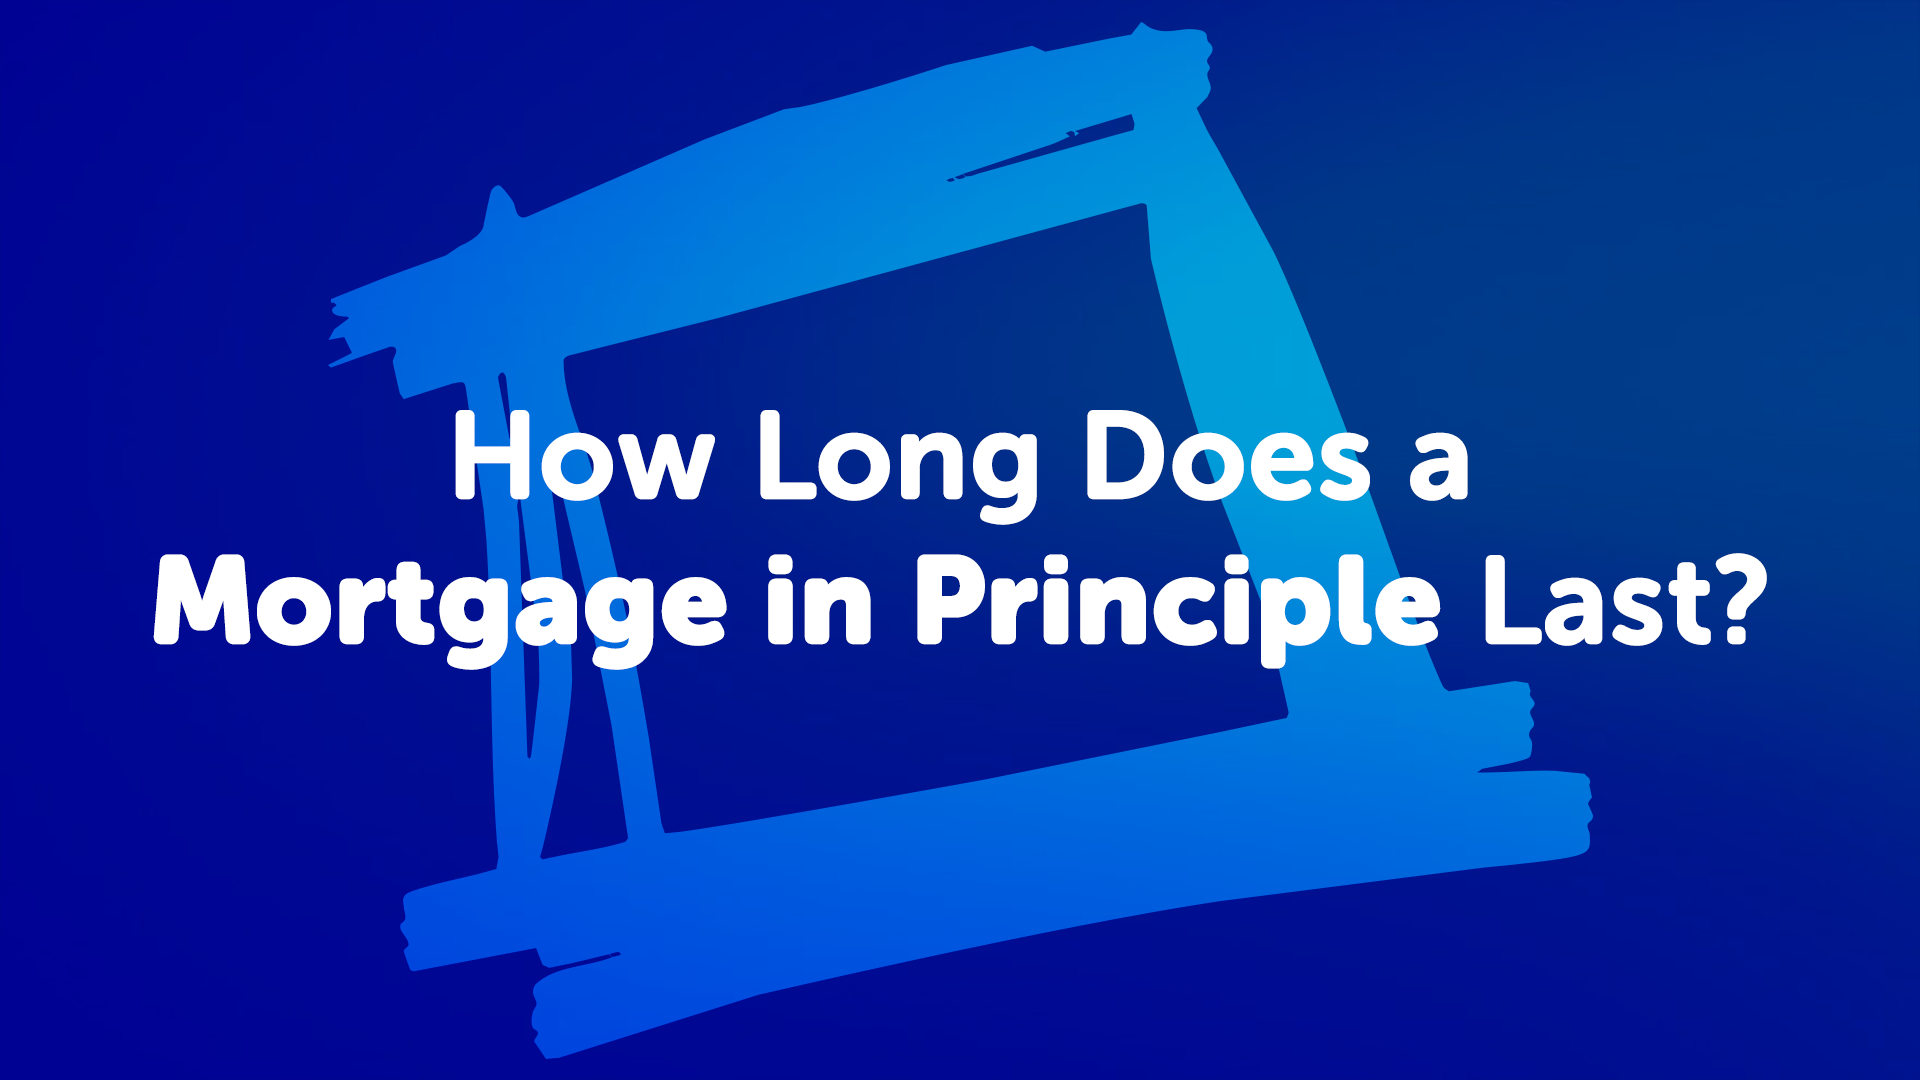 How Long Does a Mortgage in Principle Last in London? | Londonmoneyman